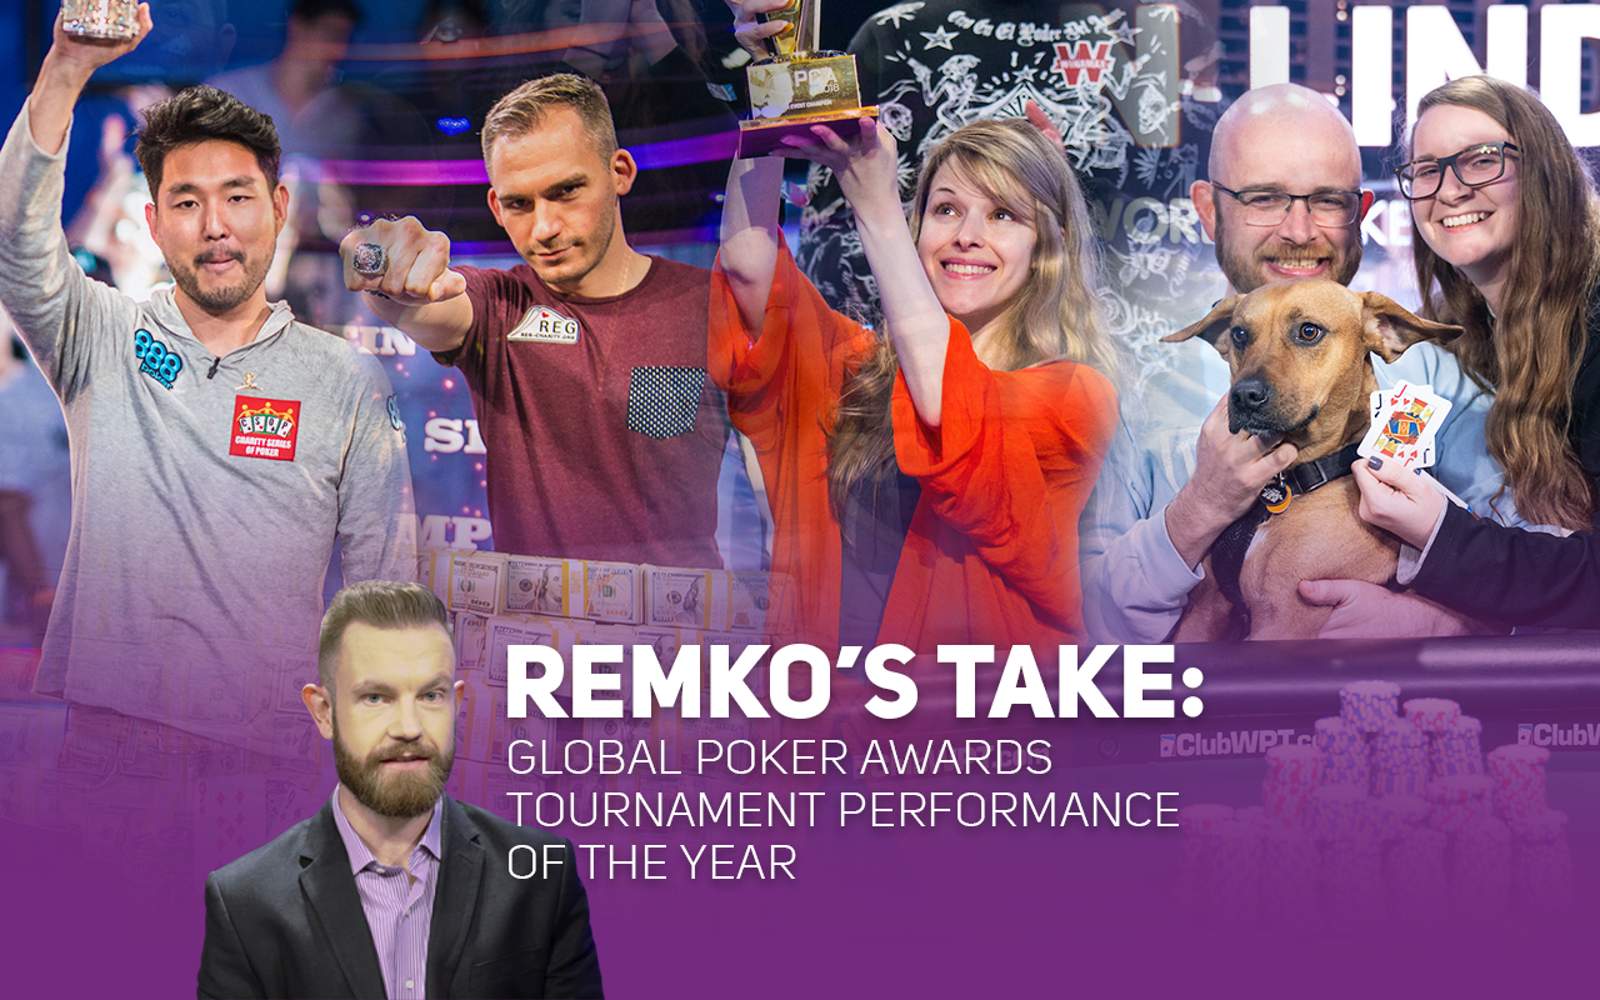 Remko's Take: Global Poker Awards Tournament Performance of the Year